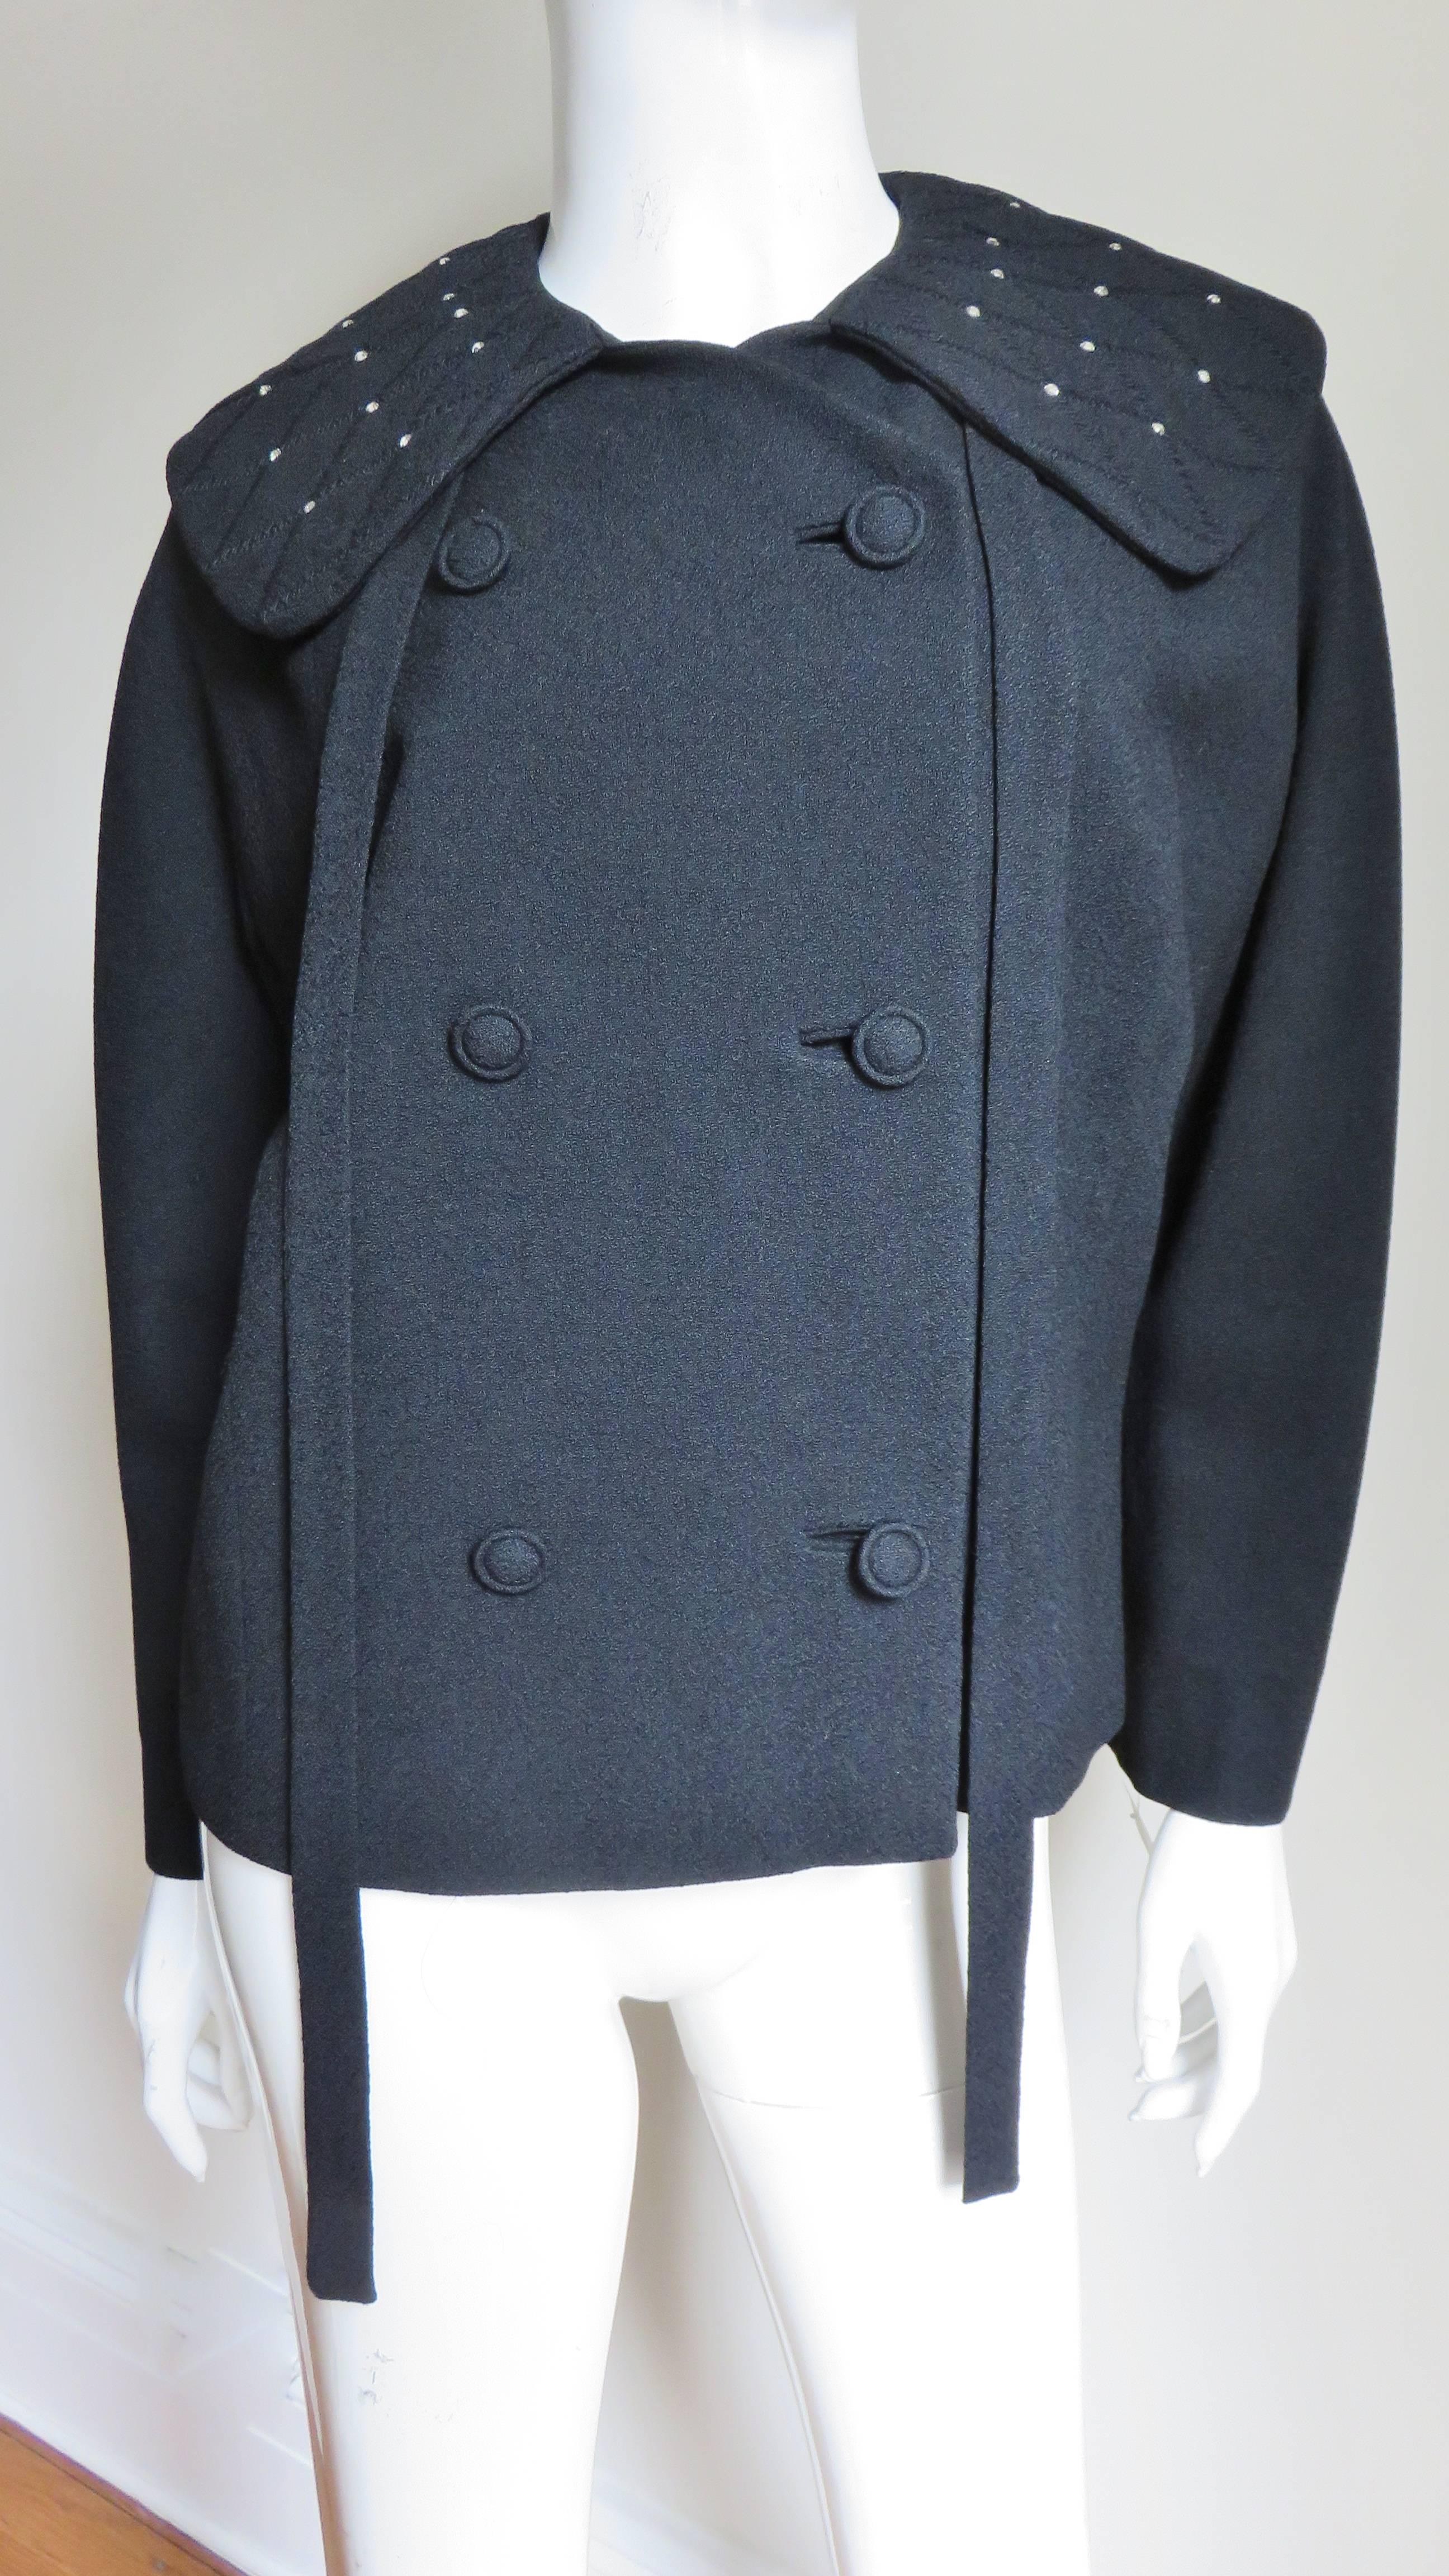 A great black wool jacket by Lilli Ann. The large collar has ties and is top stitched in a diamond pattern with prong set rhinestones at the points.  It is double breasted with self covered buttons and bound buttonholes. The sleeves are raglan style